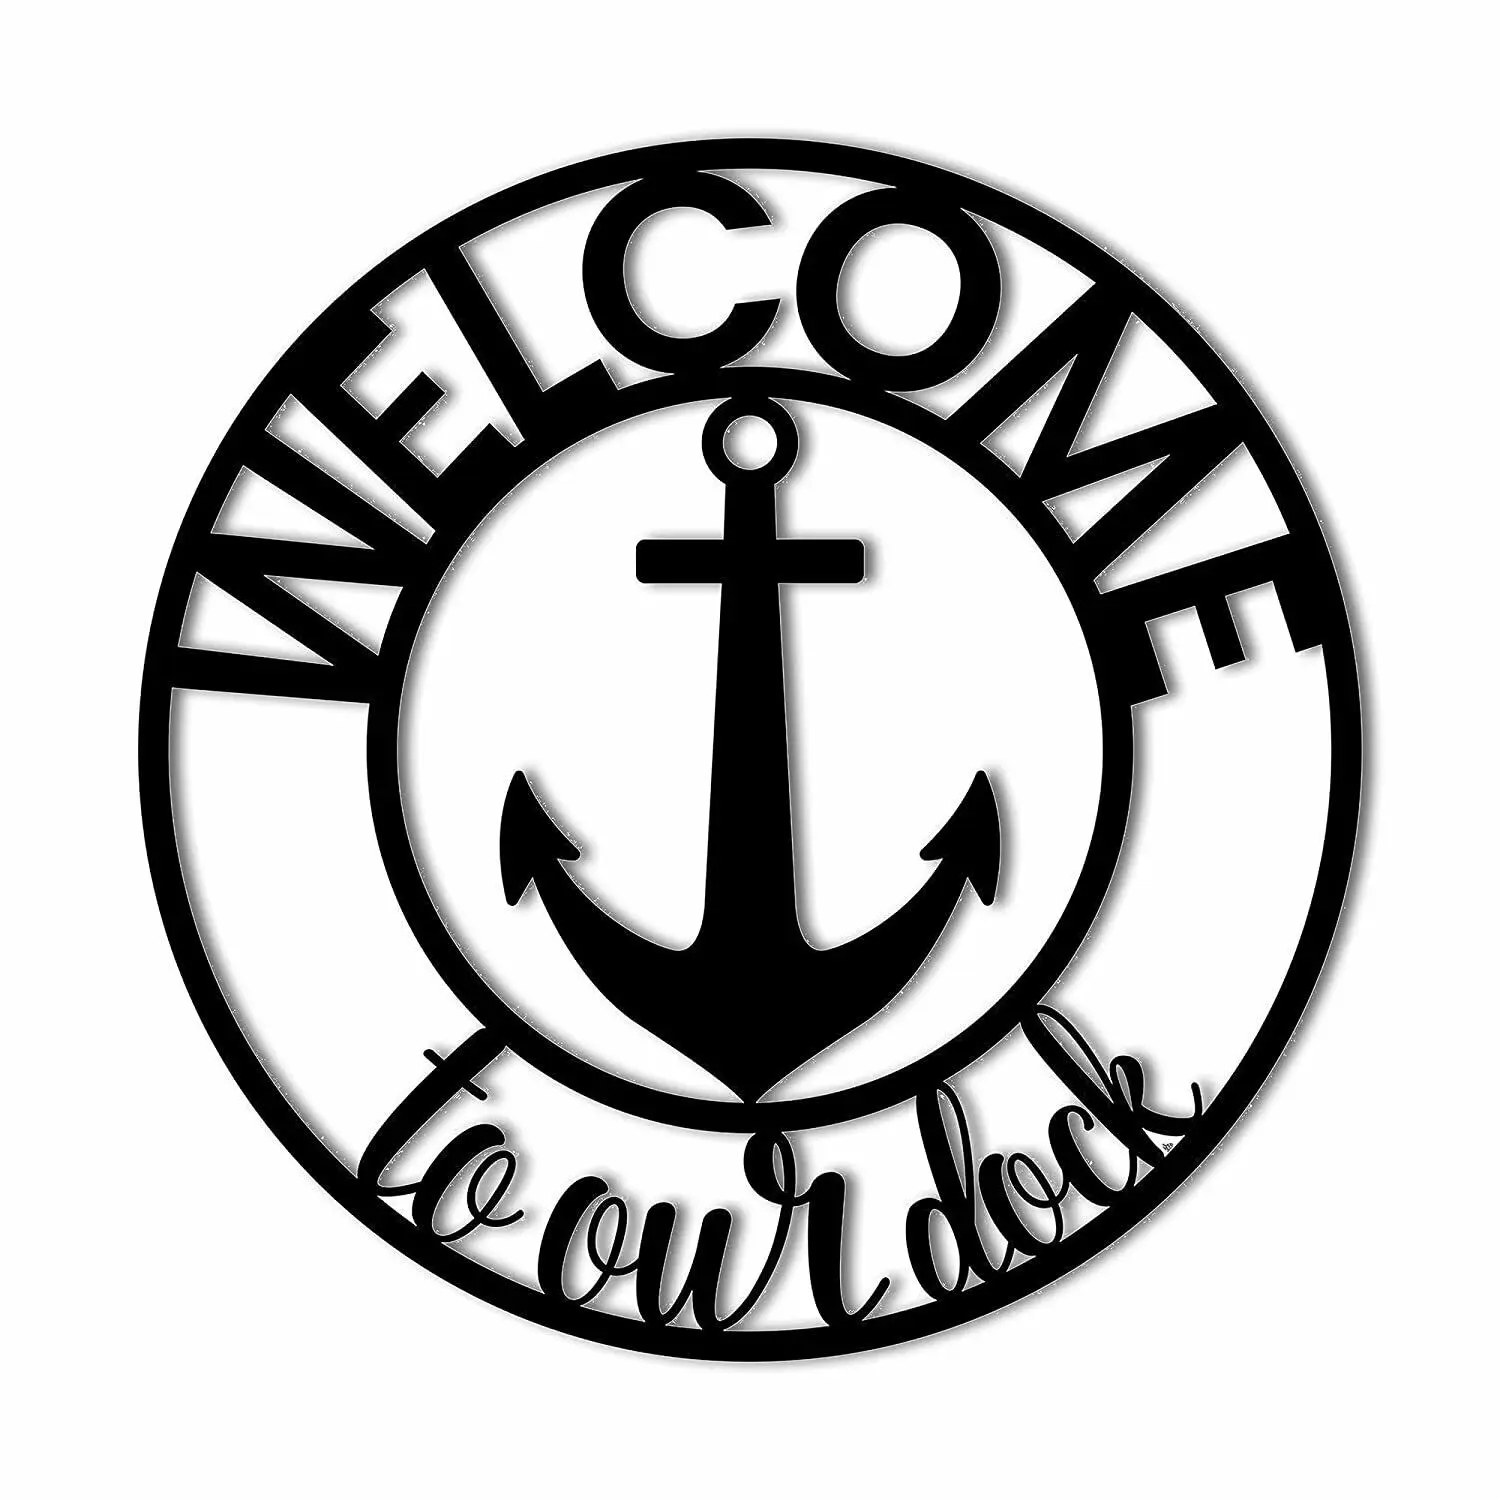 

Welcome to Our Dock Home Decor Decorative Accent Metal Art Wall Sign, Black